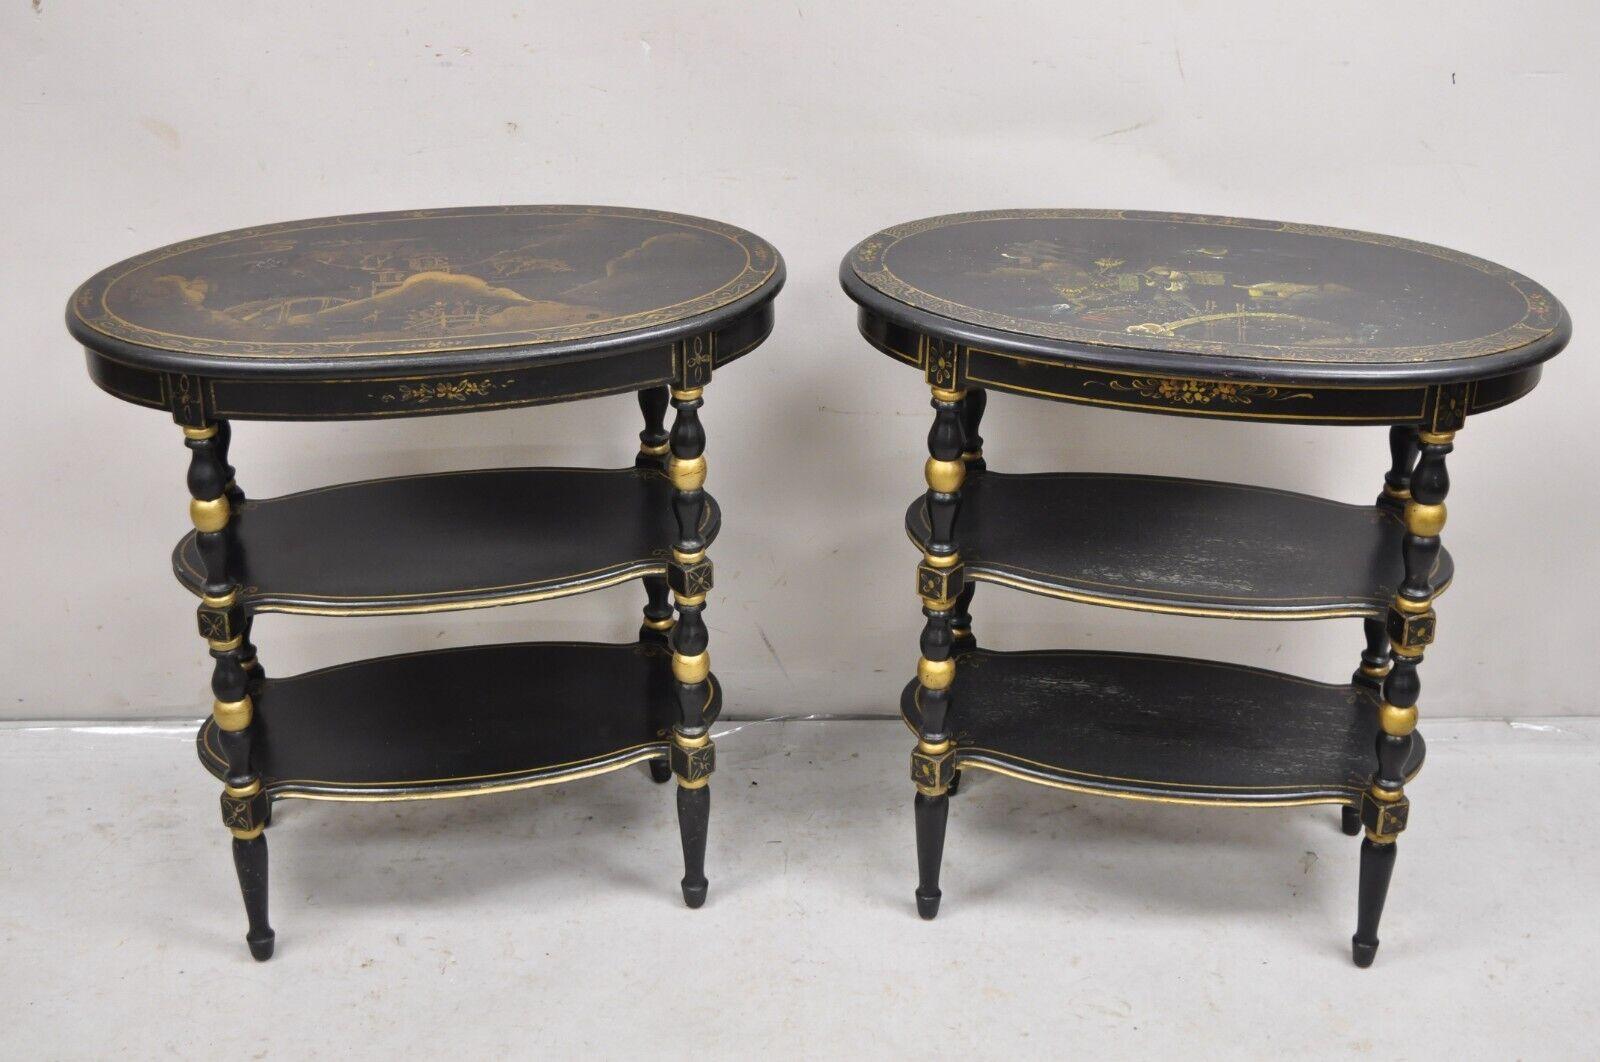 Vintage Chinoiserie Black Painted Oval 3 Tier Side Tables by Yeager - a Pair. Item features beautiful hand painted scenes to tops, gold gilt accents, original label, very unique vintage tables. Circa Early 20th Century. Measurements: 26.5